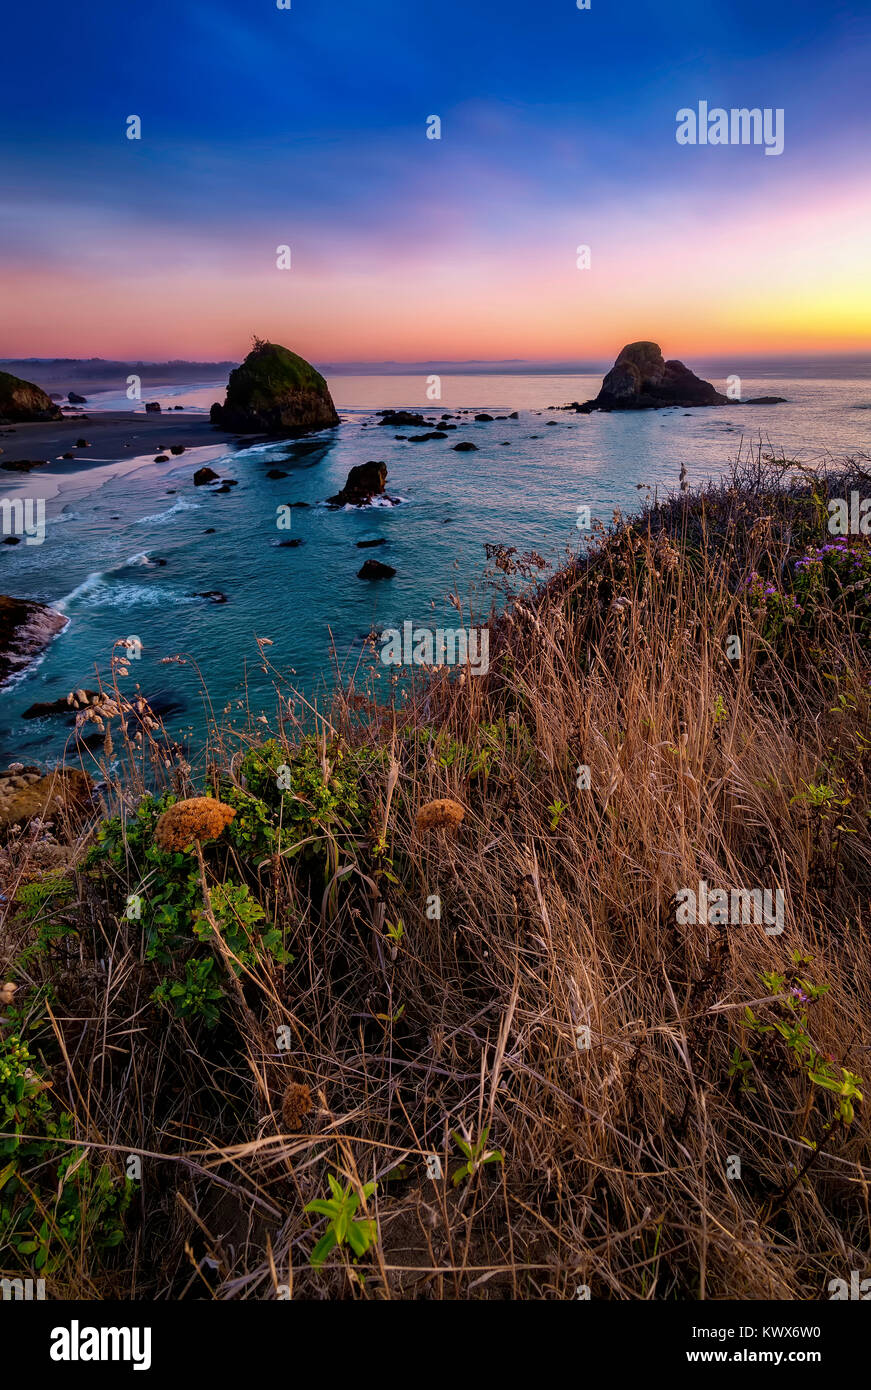 Color image of a beautiful sunset overlooking the Pacific Ocean in Northern California. Stock Photo